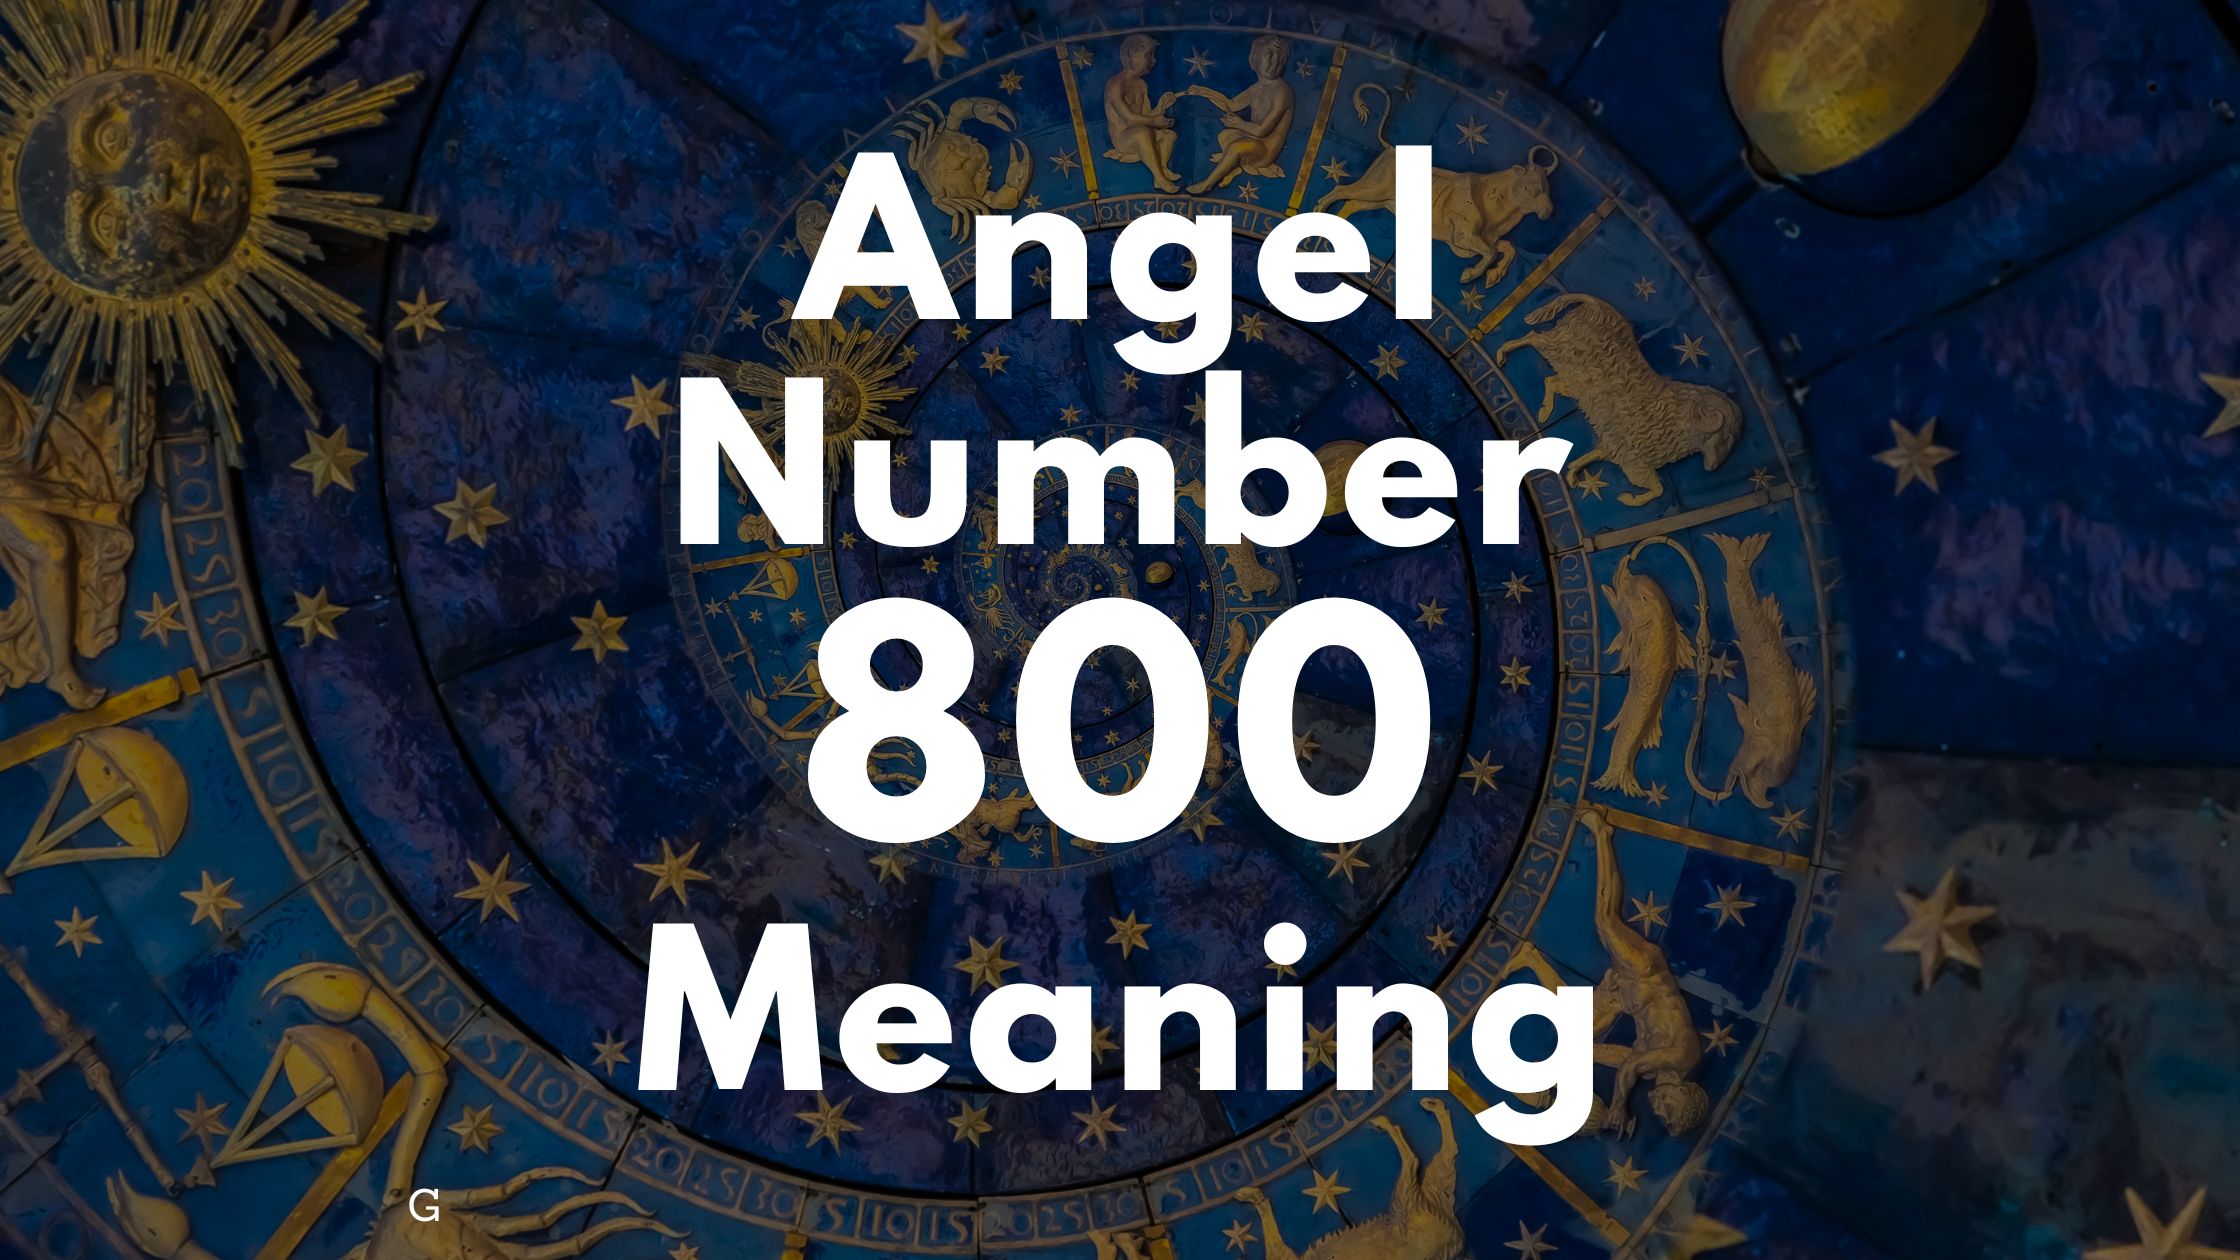 Angel Number 800 Spiritual Meaning, Symbolism, and Significance